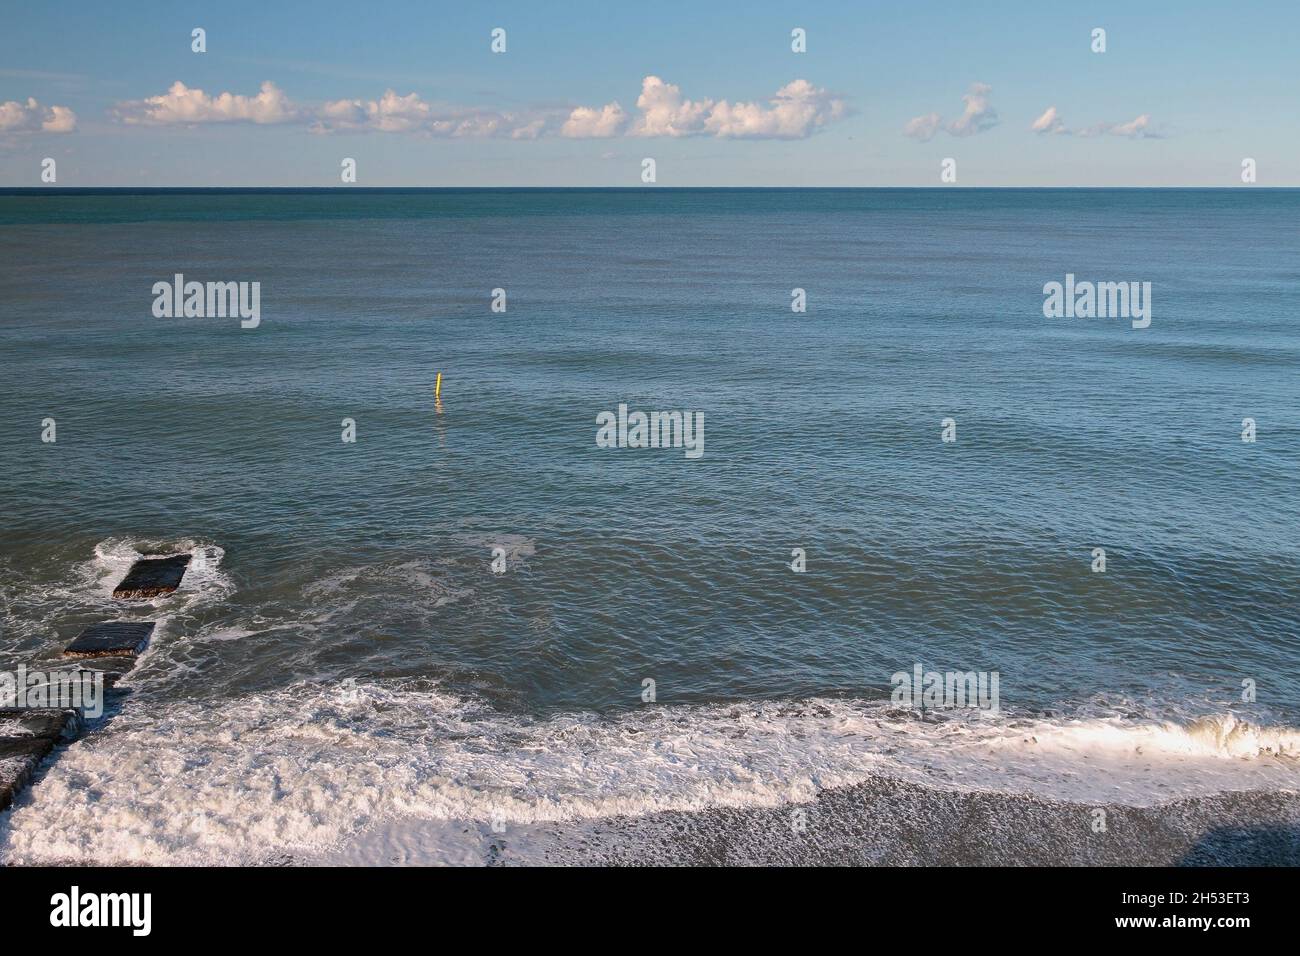 Breakwater and sea after last night's storm. Adler, Sochi, Russia Stock Photo